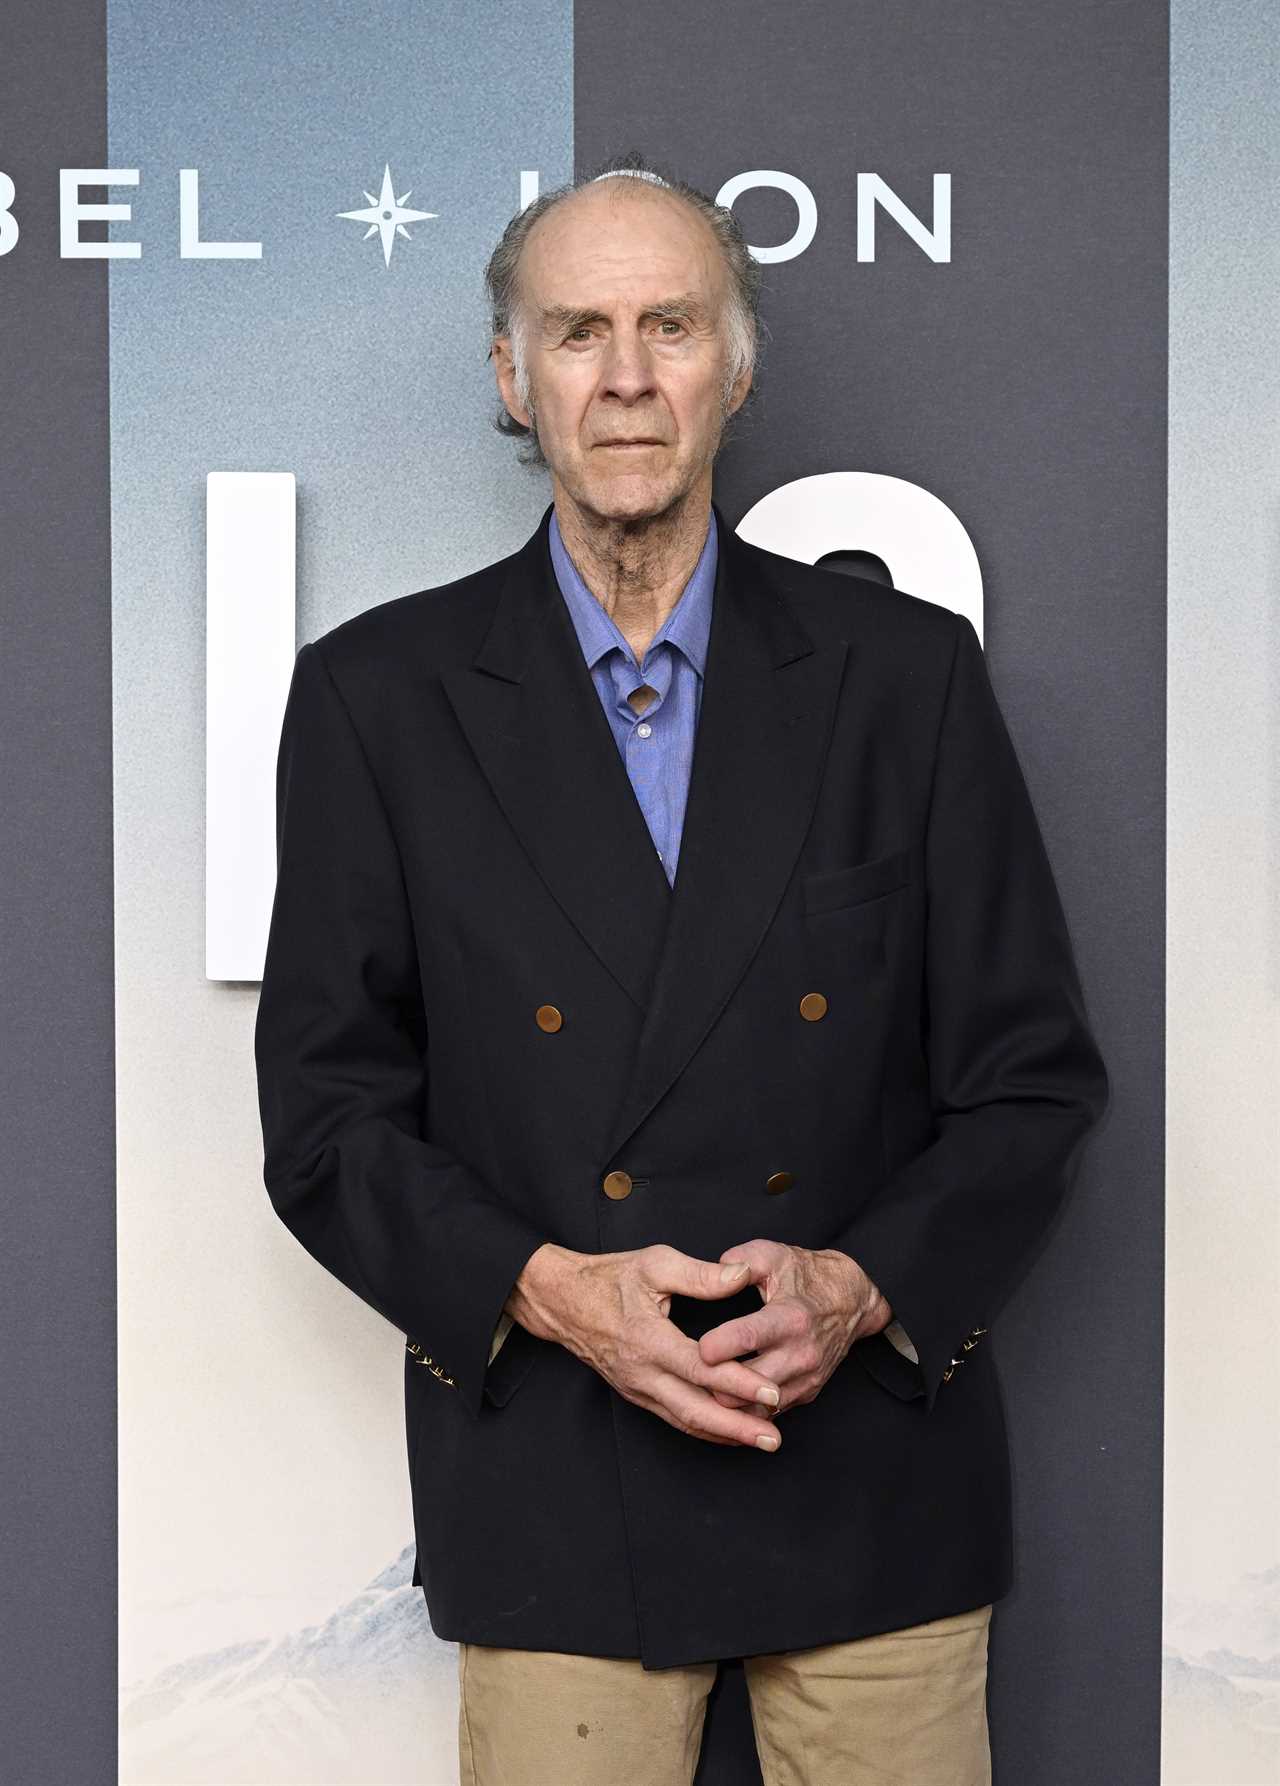 LONDON, ENGLAND - JULY 04: Sir Ranulph Fiennes attends the World Premiere of "Explorer" at BFI Southbank on July 04, 2022 in London, England. (Photo by Gareth Cattermole/Getty Images)